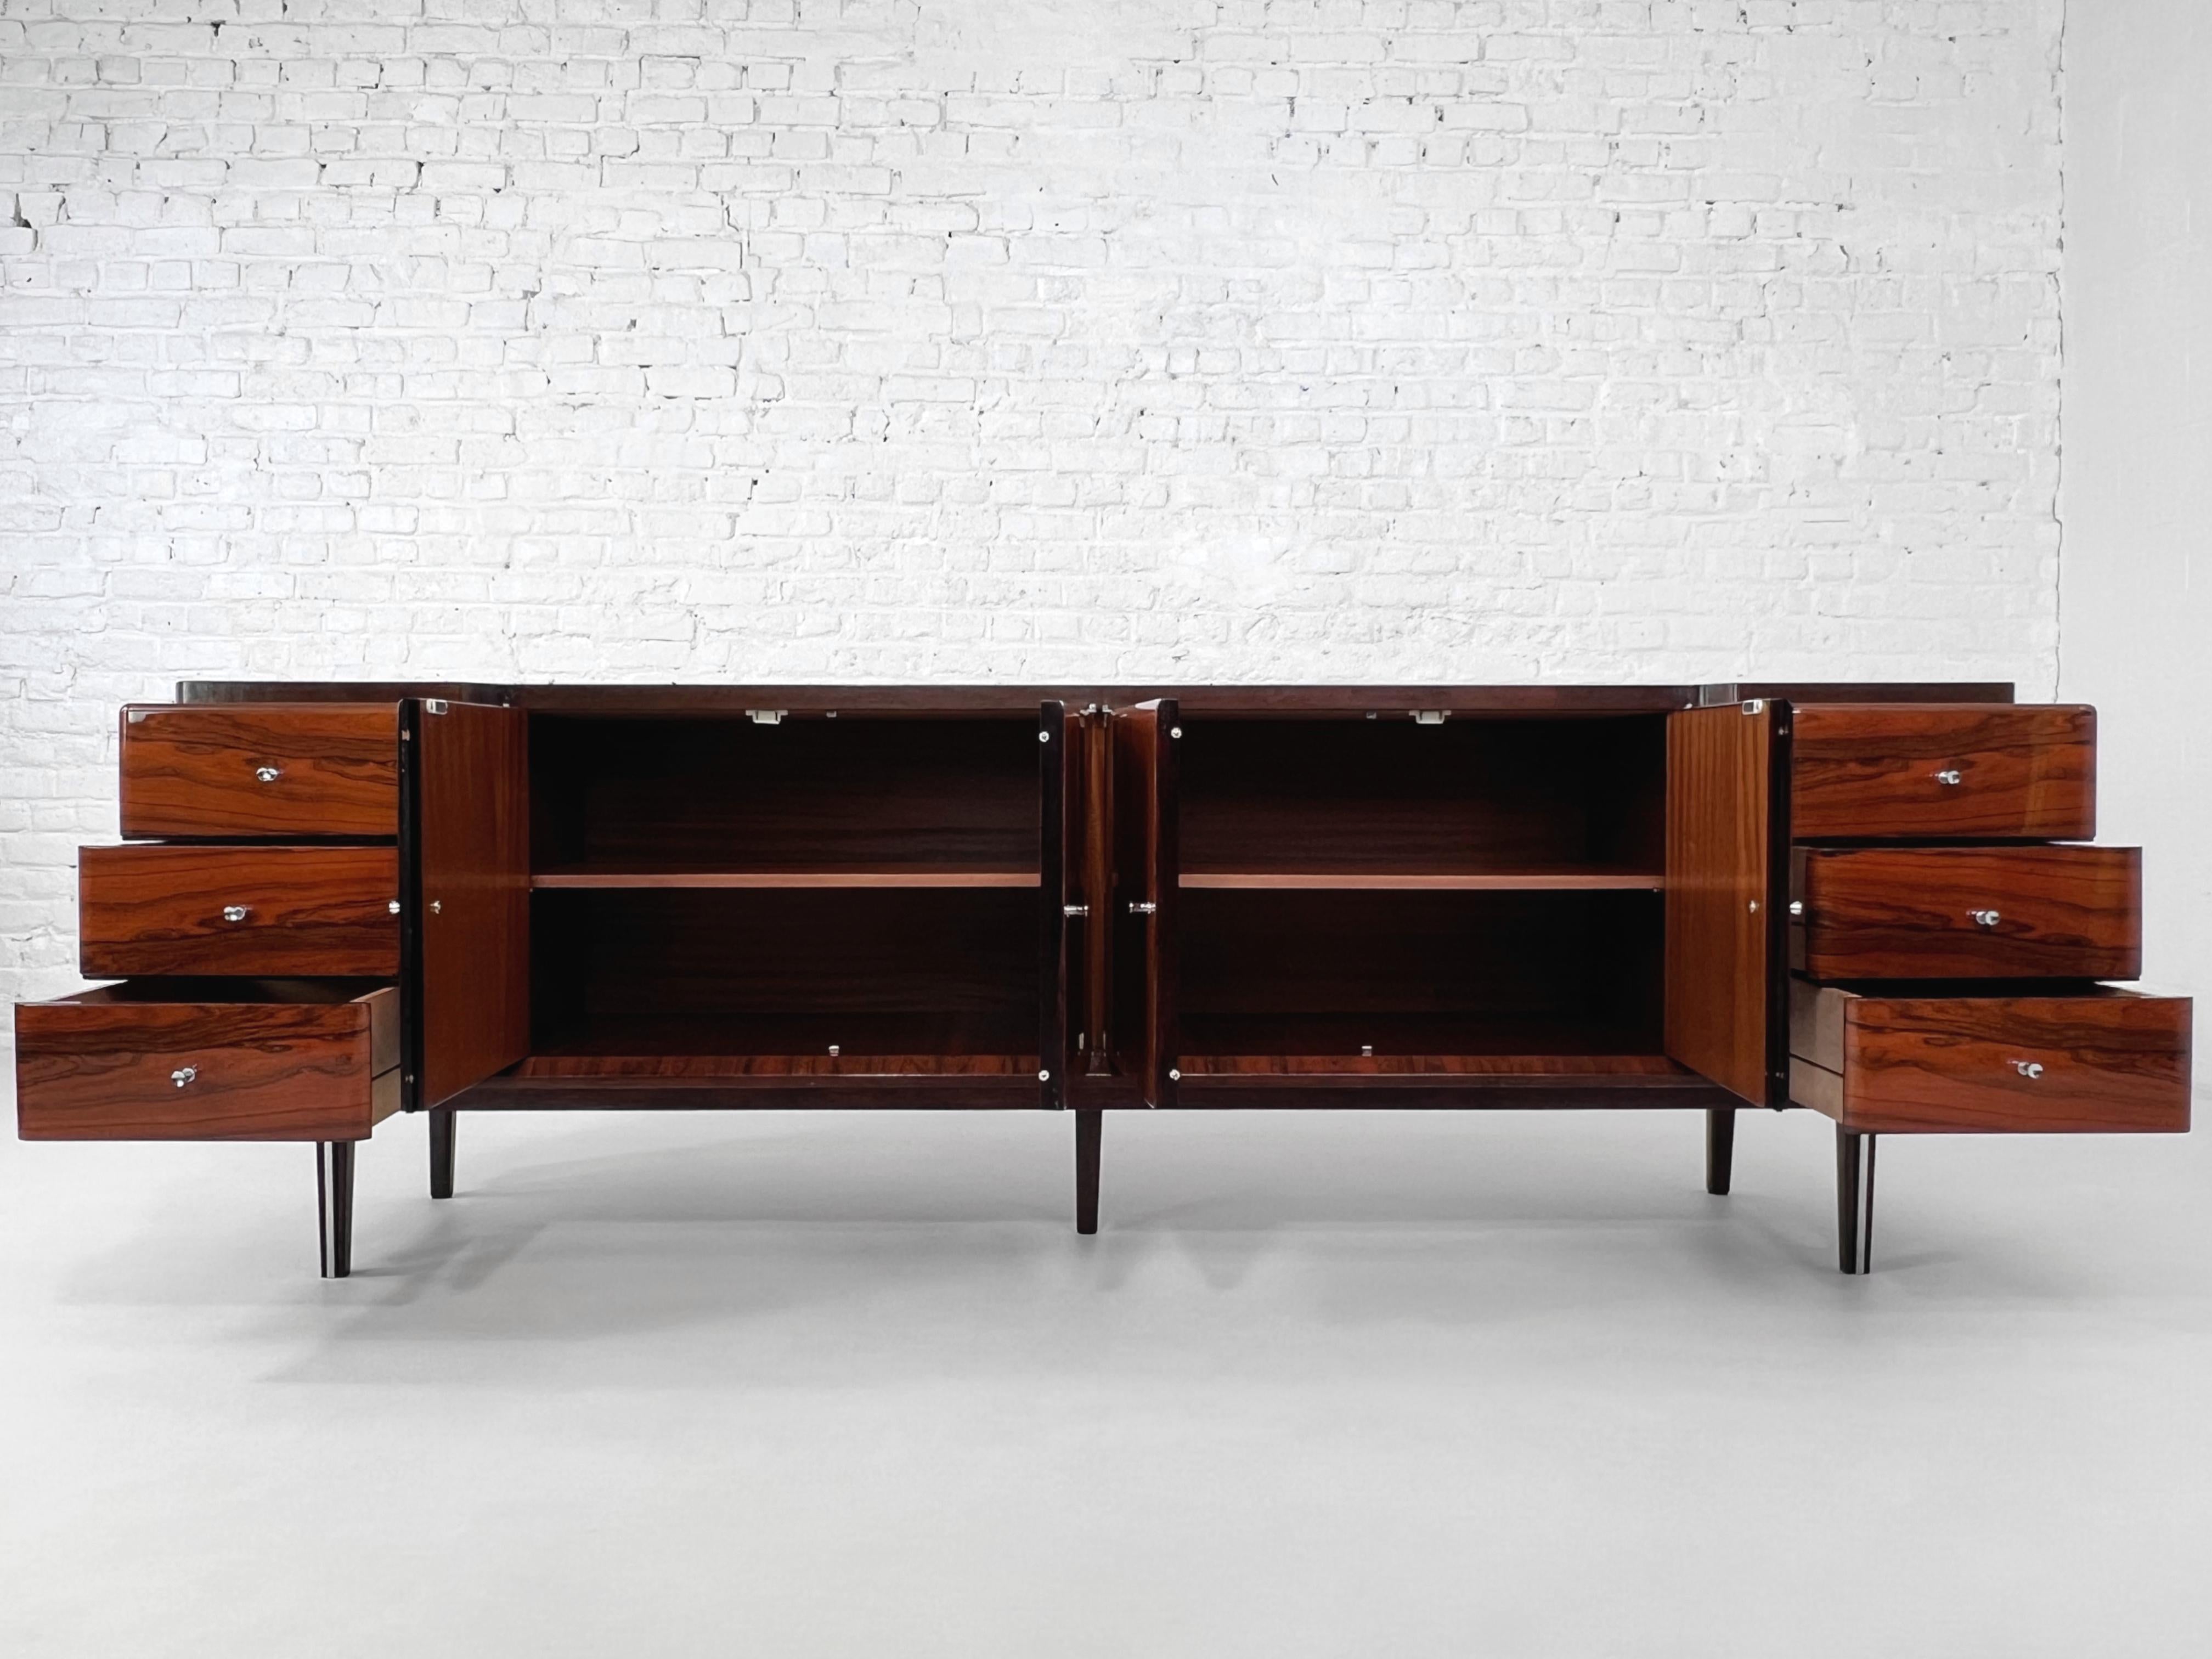 1950 -1960s Italian Design Rosewood Glossy Finishes Curved Sideboard composed of rosewood wooden structure. It features 3 large drawers each side and door panels opening on shelves storage in the middle. Glossy finish, chrome handles and outlines on